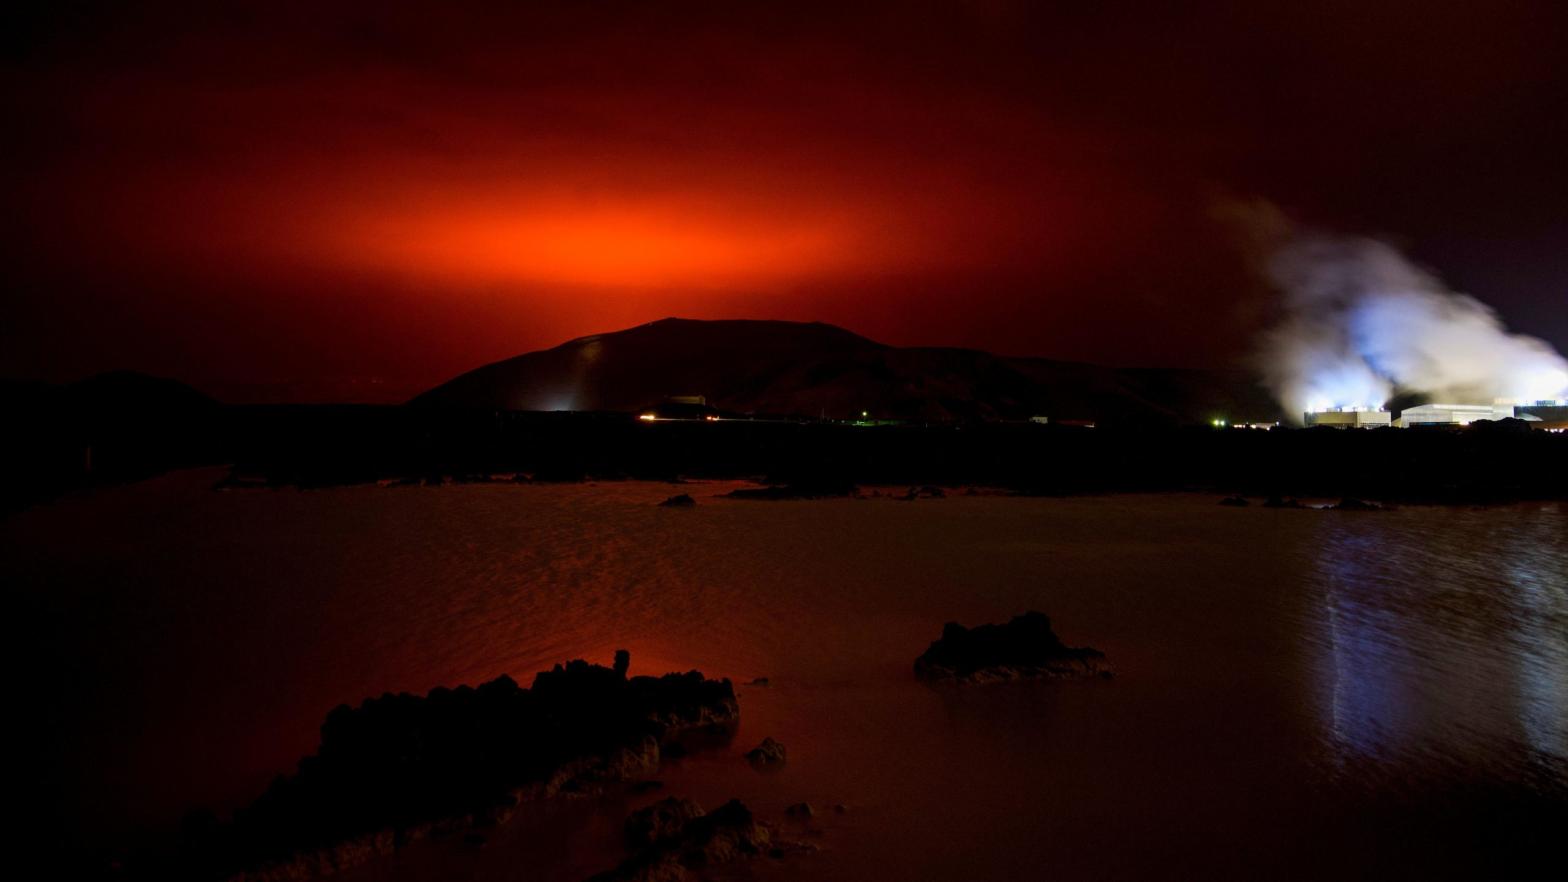 A volcano erupted near Iceland's capital Reykjavík on Friday, shooting up a fountain of lava that lit the night sky following thousands of small earthquakes in recent weeks. (Photo: Halldor Kolbeins/AFP, Getty Images)